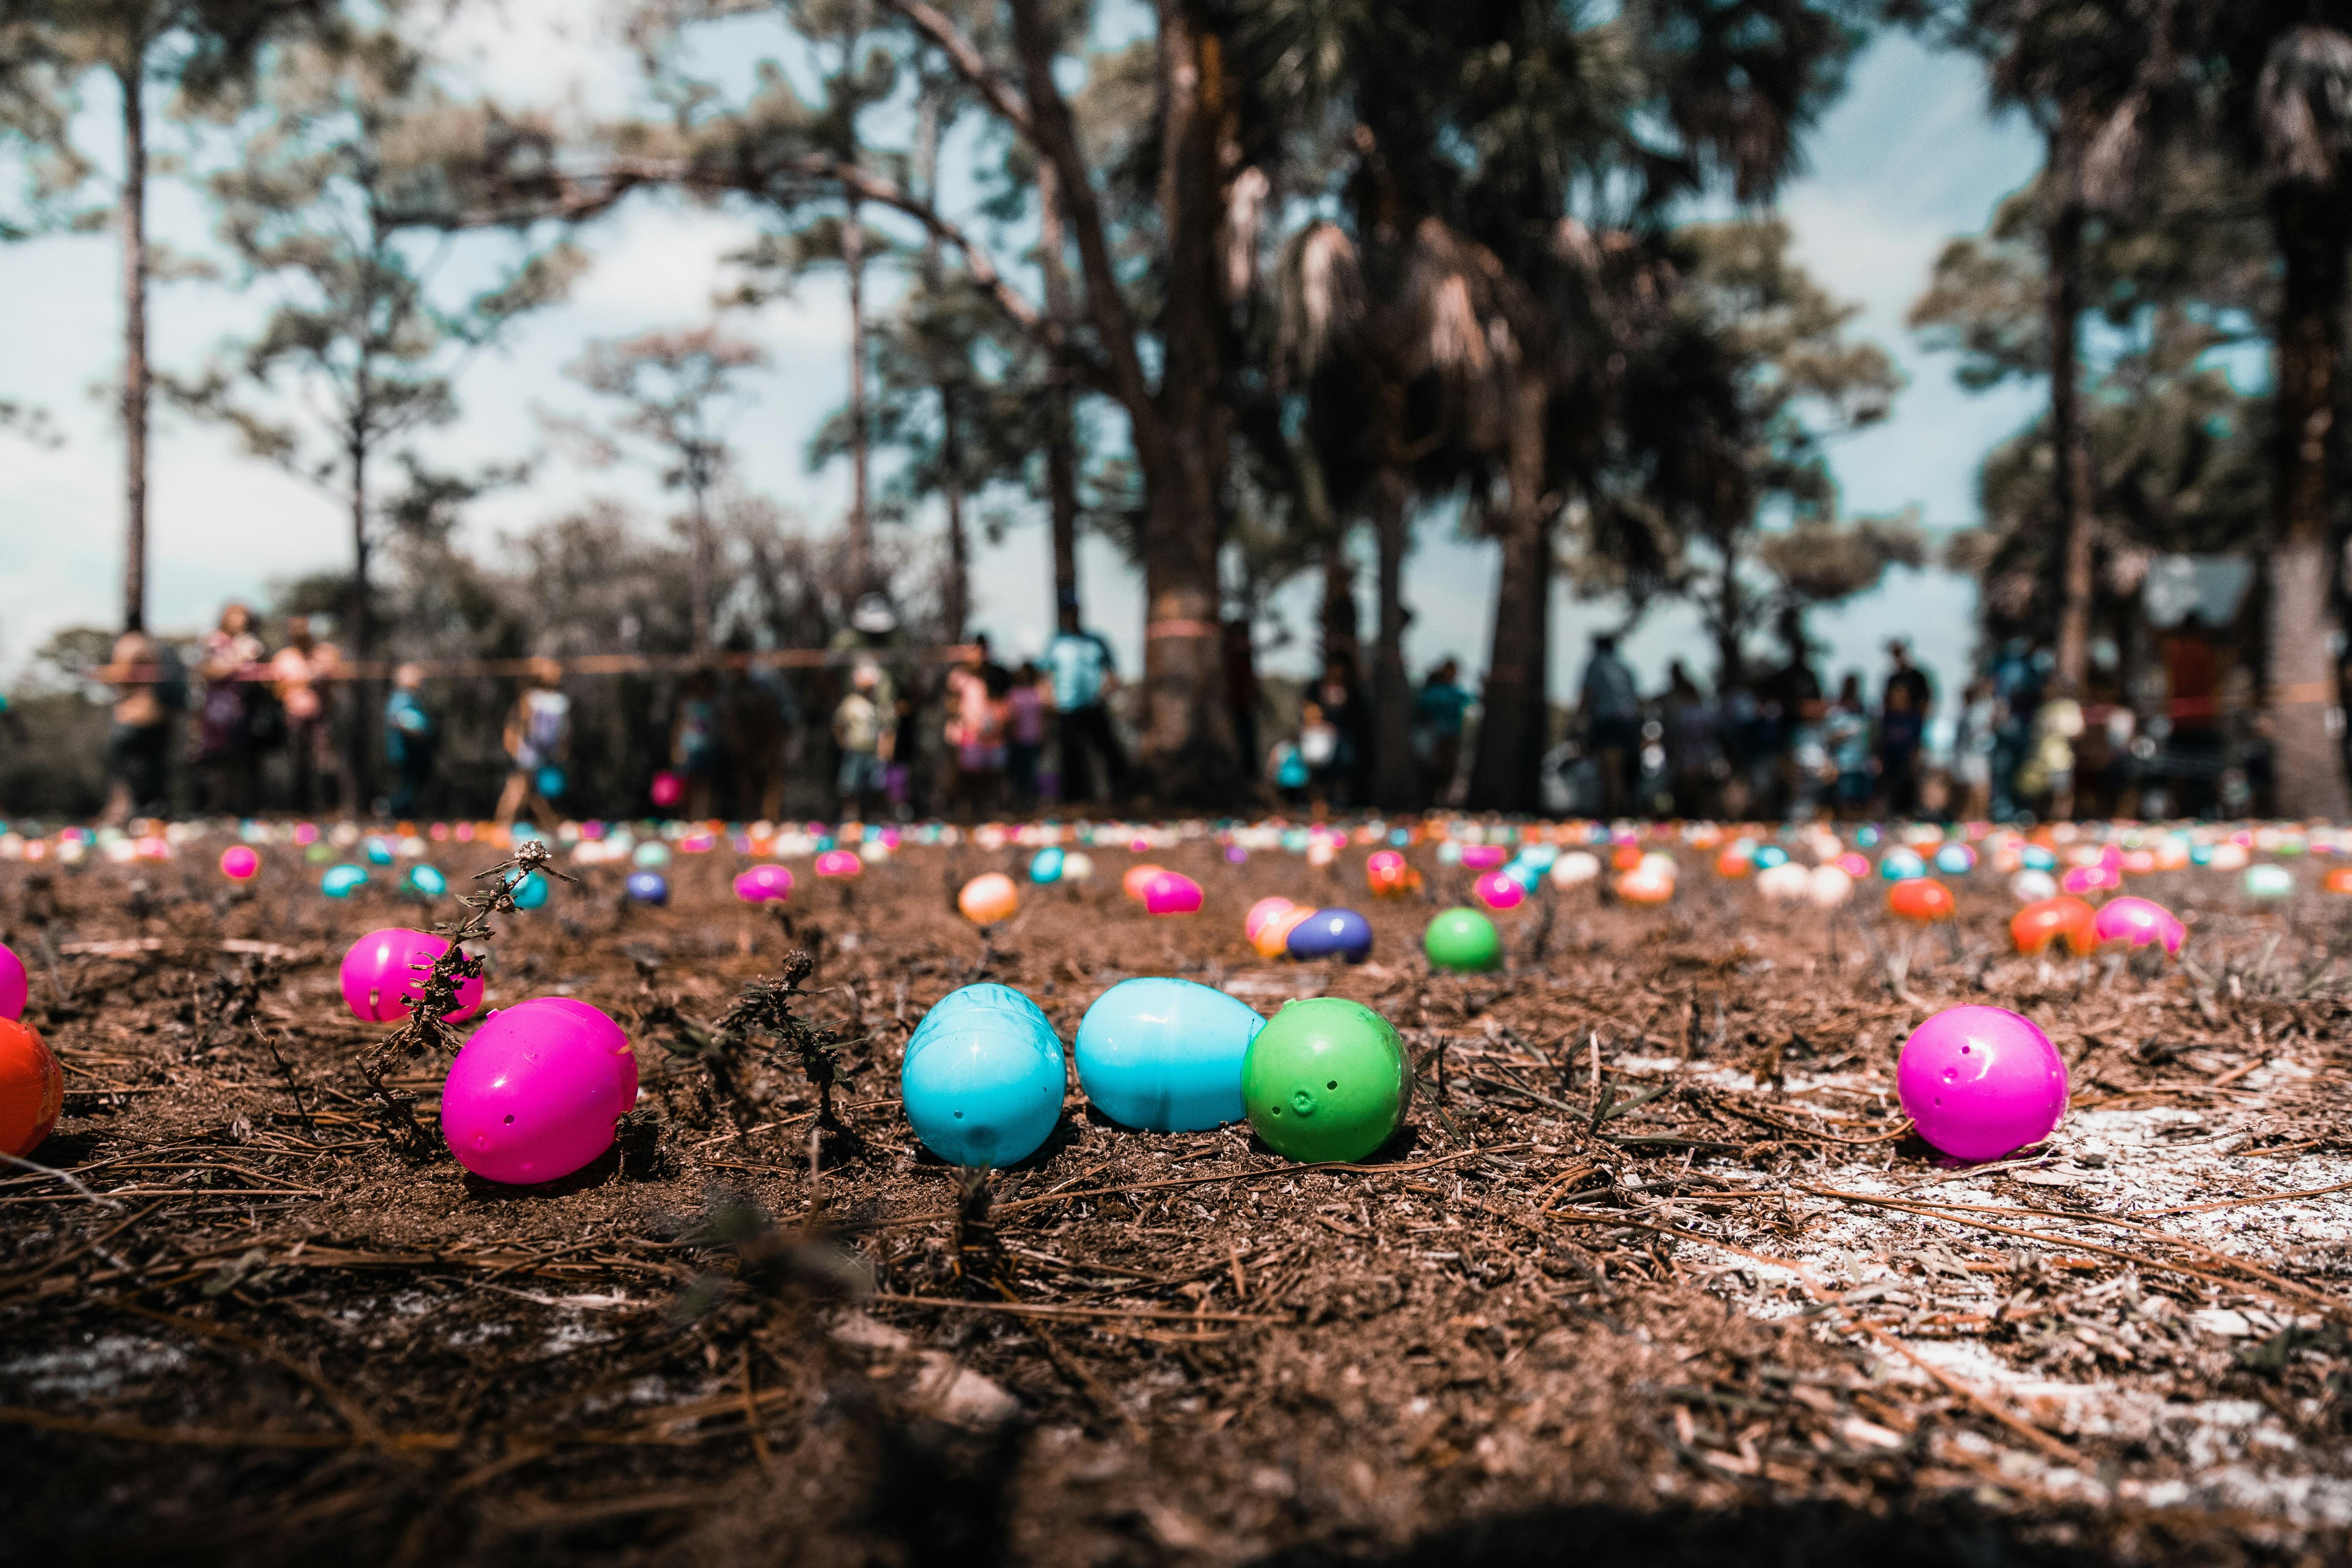 Photo of children lined up for an Easter egg hunt with plastic eggs in the foreground.